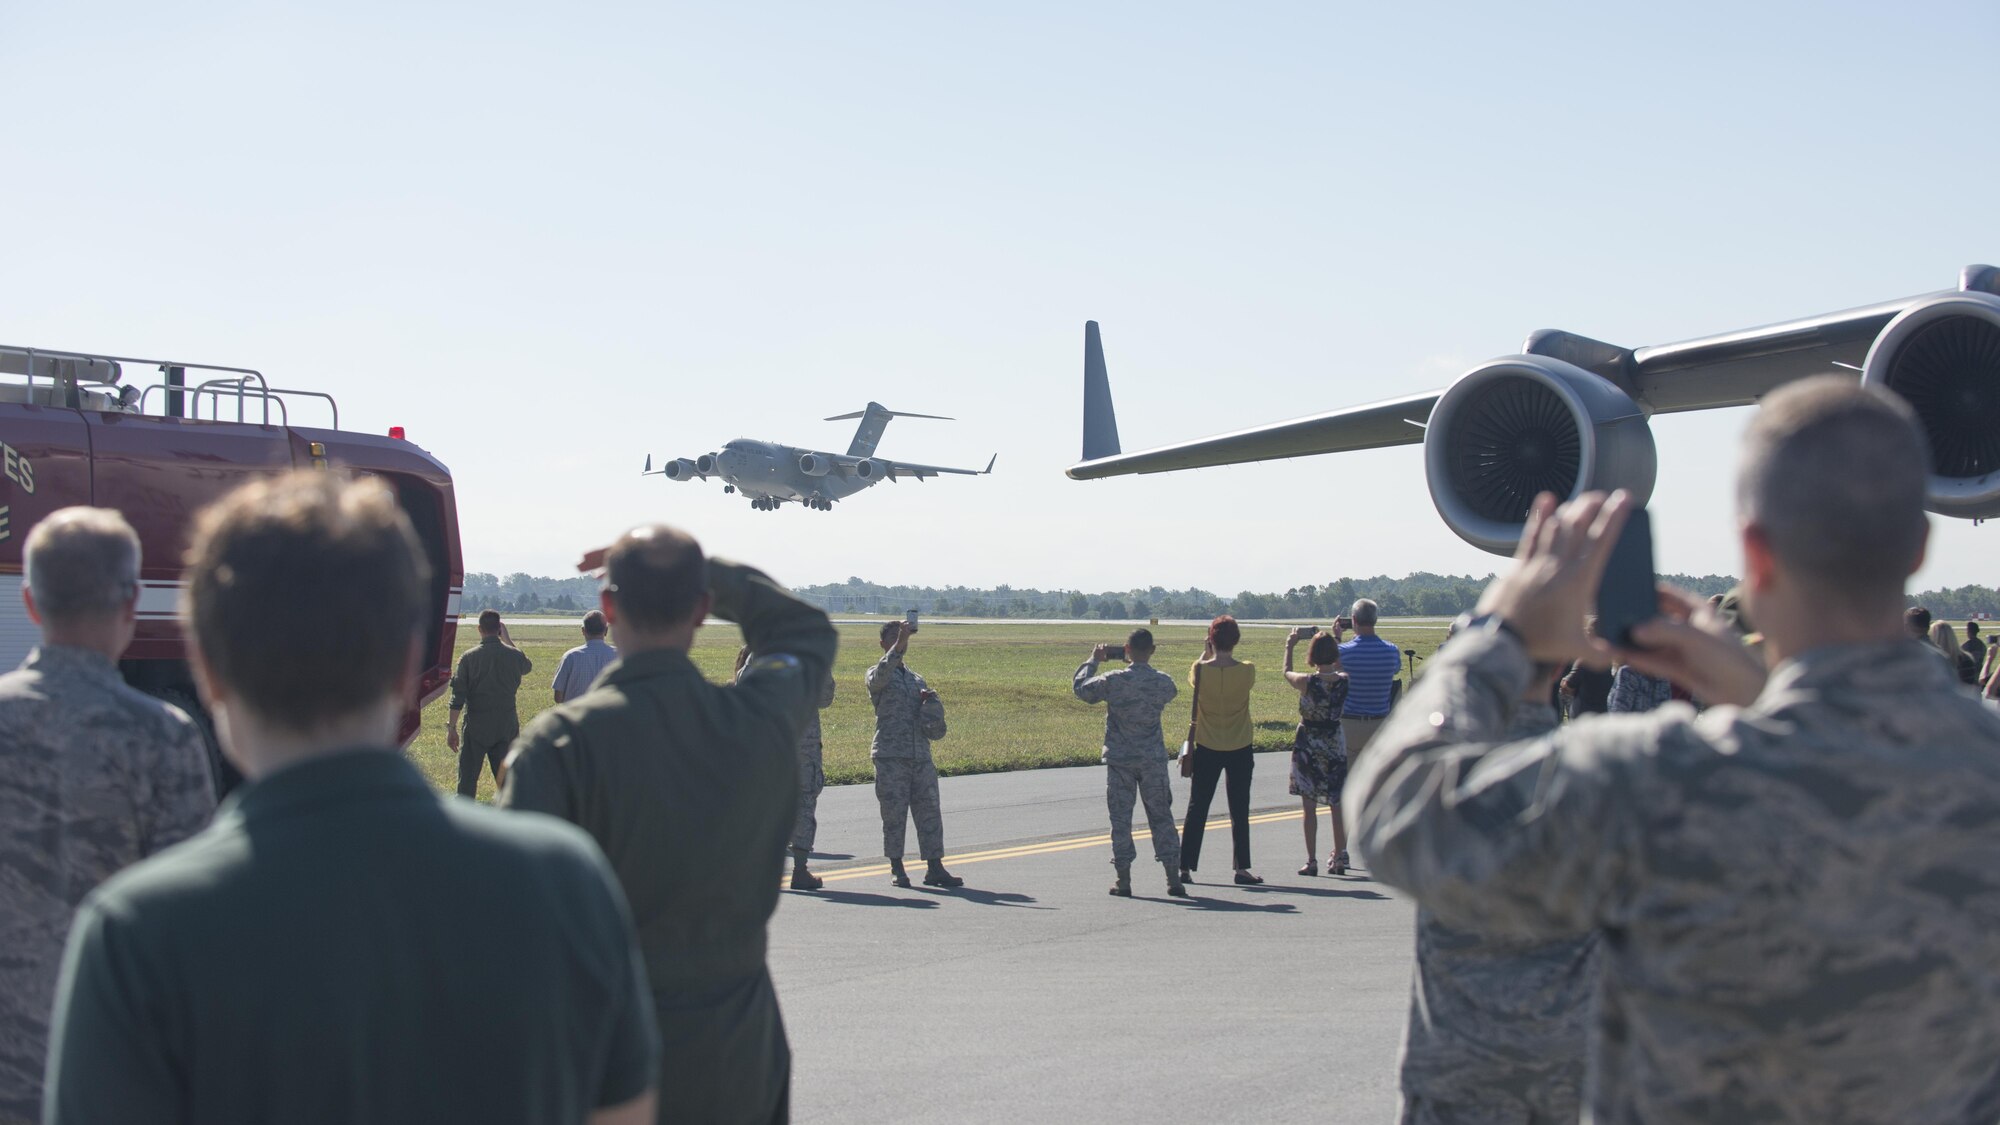 A C-17A Globemaster III lands on runway 01-19 during a ribbon cutting ceremony Sept. 23, 2016, on Dover Air Force Base, Del. The C-17 was the second aircraft to land on the newly renovated runway after a C-5M Super Galaxy. (U.S. Air Force photo by Staff Sgt. Jared Duhon)
